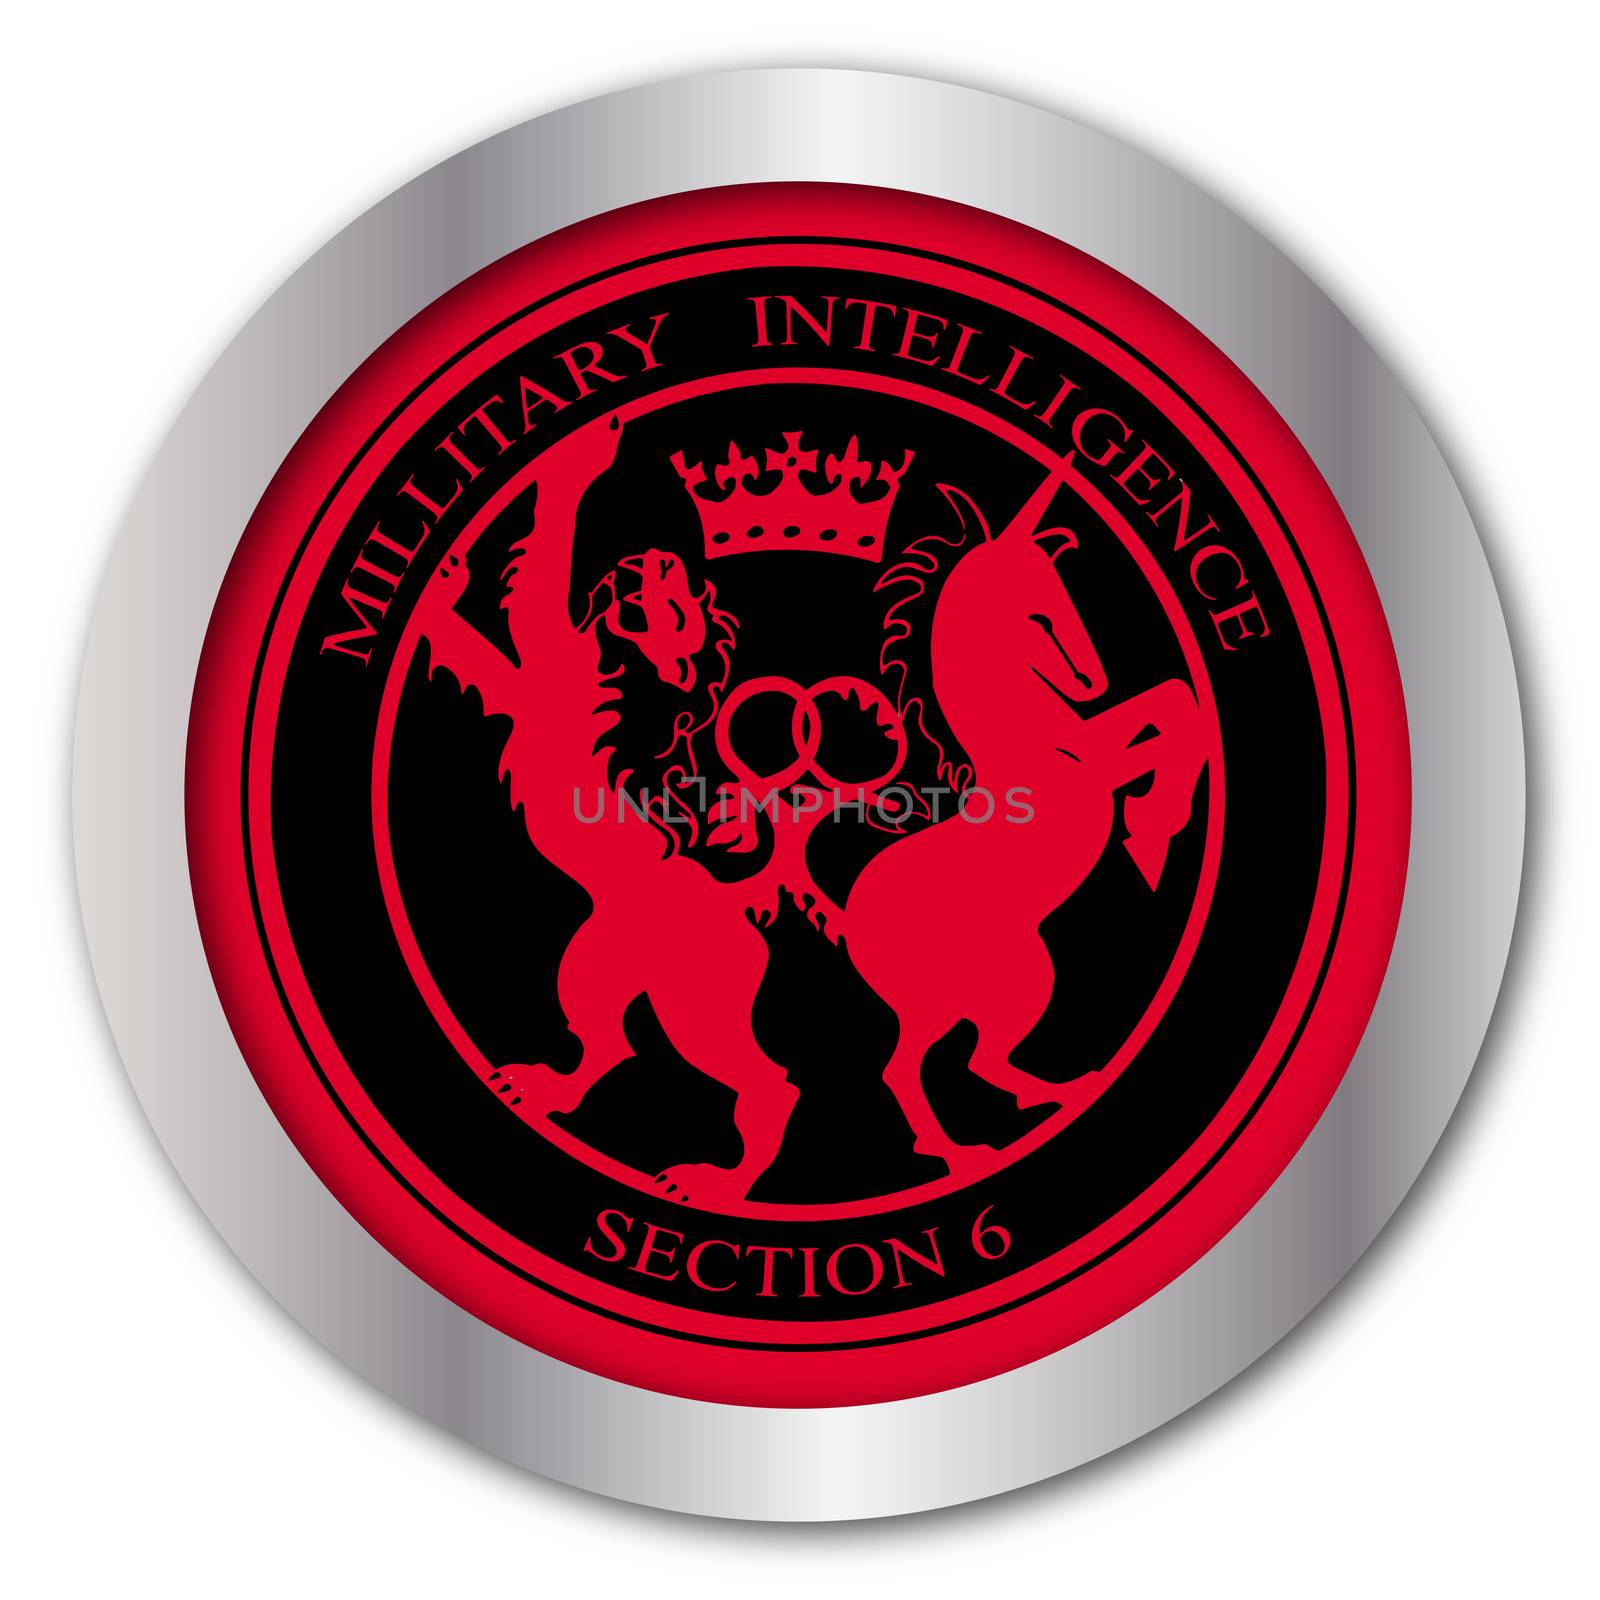 A depiction of the Mi6 logo as a button on white